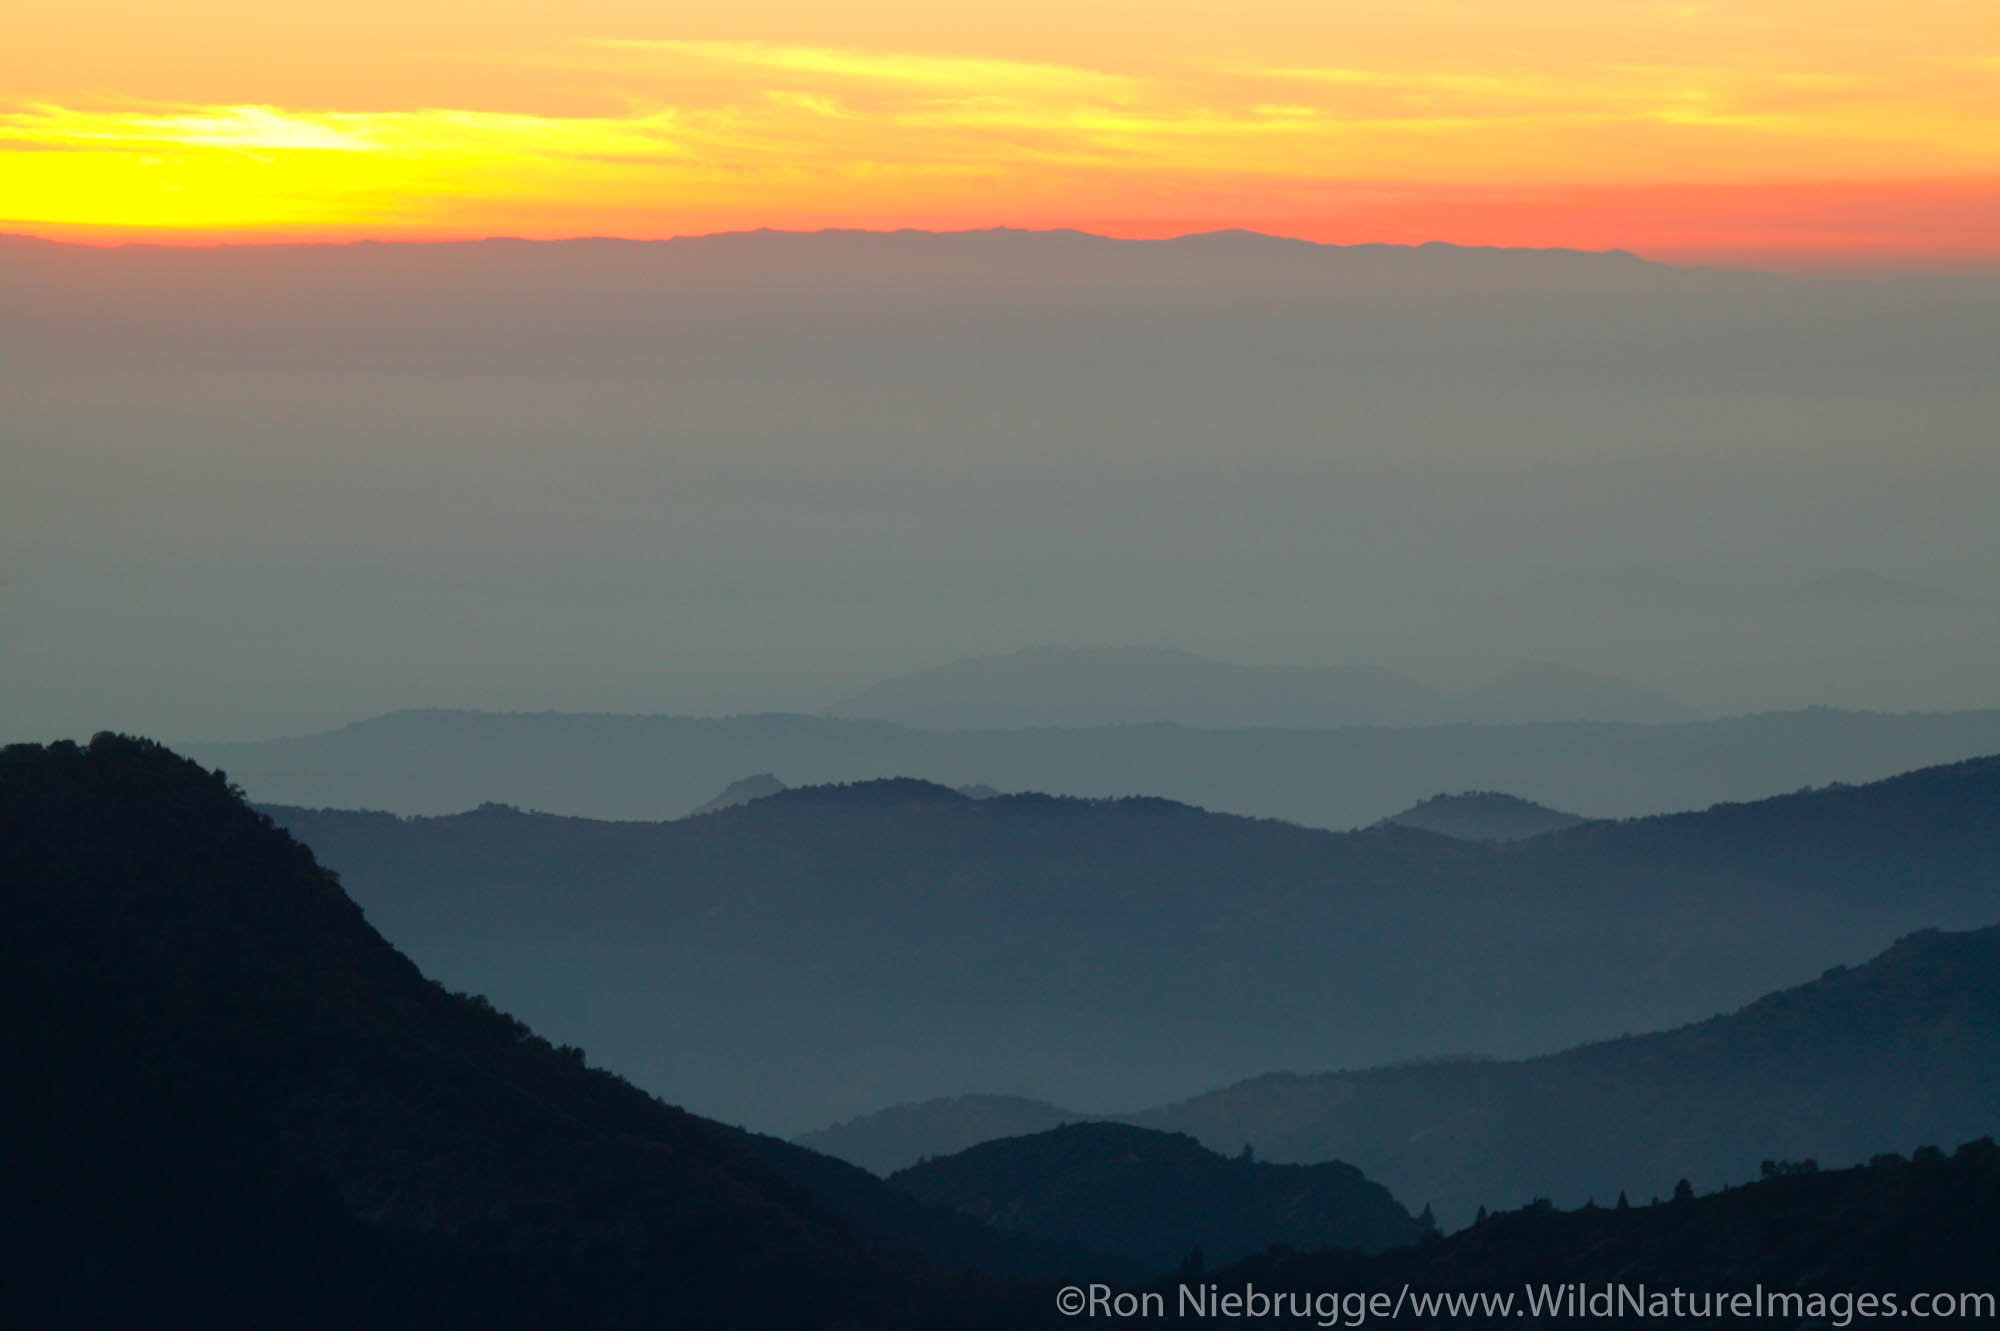 Looking towards the Central Valley from Moro Rock, Sequoia National Park, California.